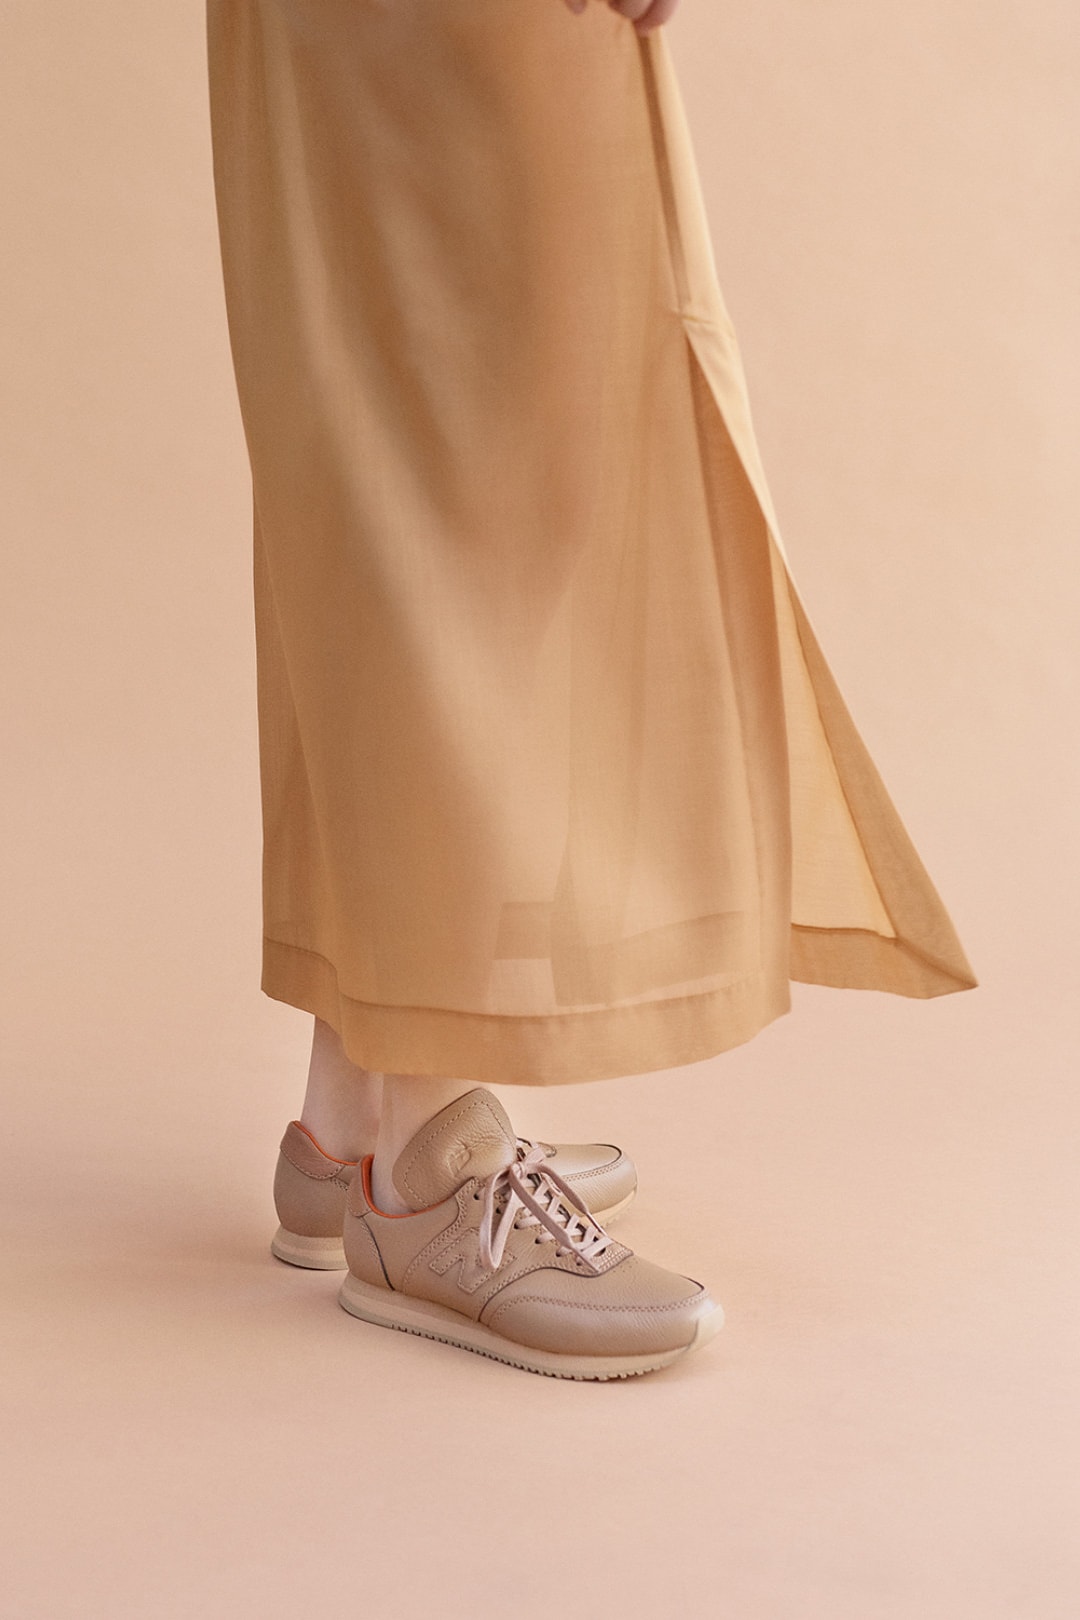 AURALEE x New Balance SS20 COMP100, Apparel collaboration collection spring summer 2020 japan sneaker wholegarment cotton knit pants sweater 